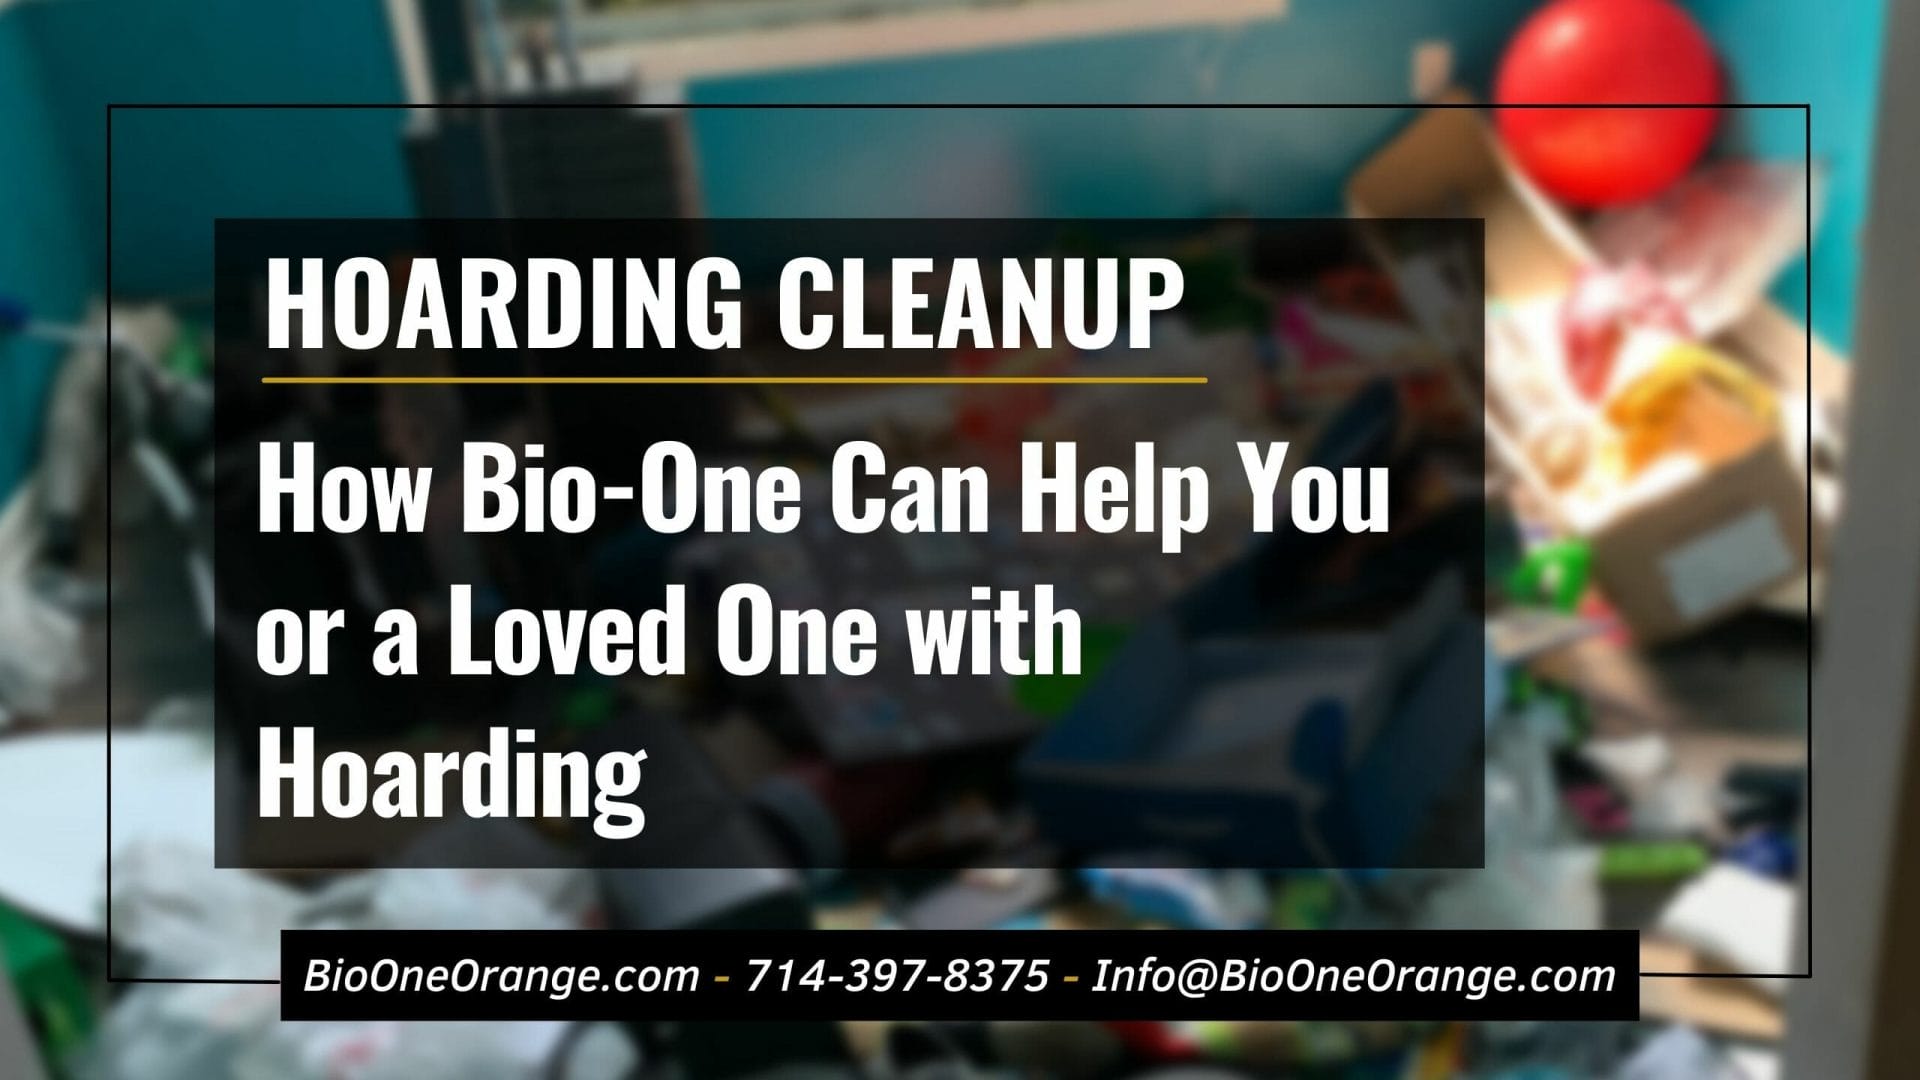 How Bio-One Can Help You or a Loved One with Hoarding